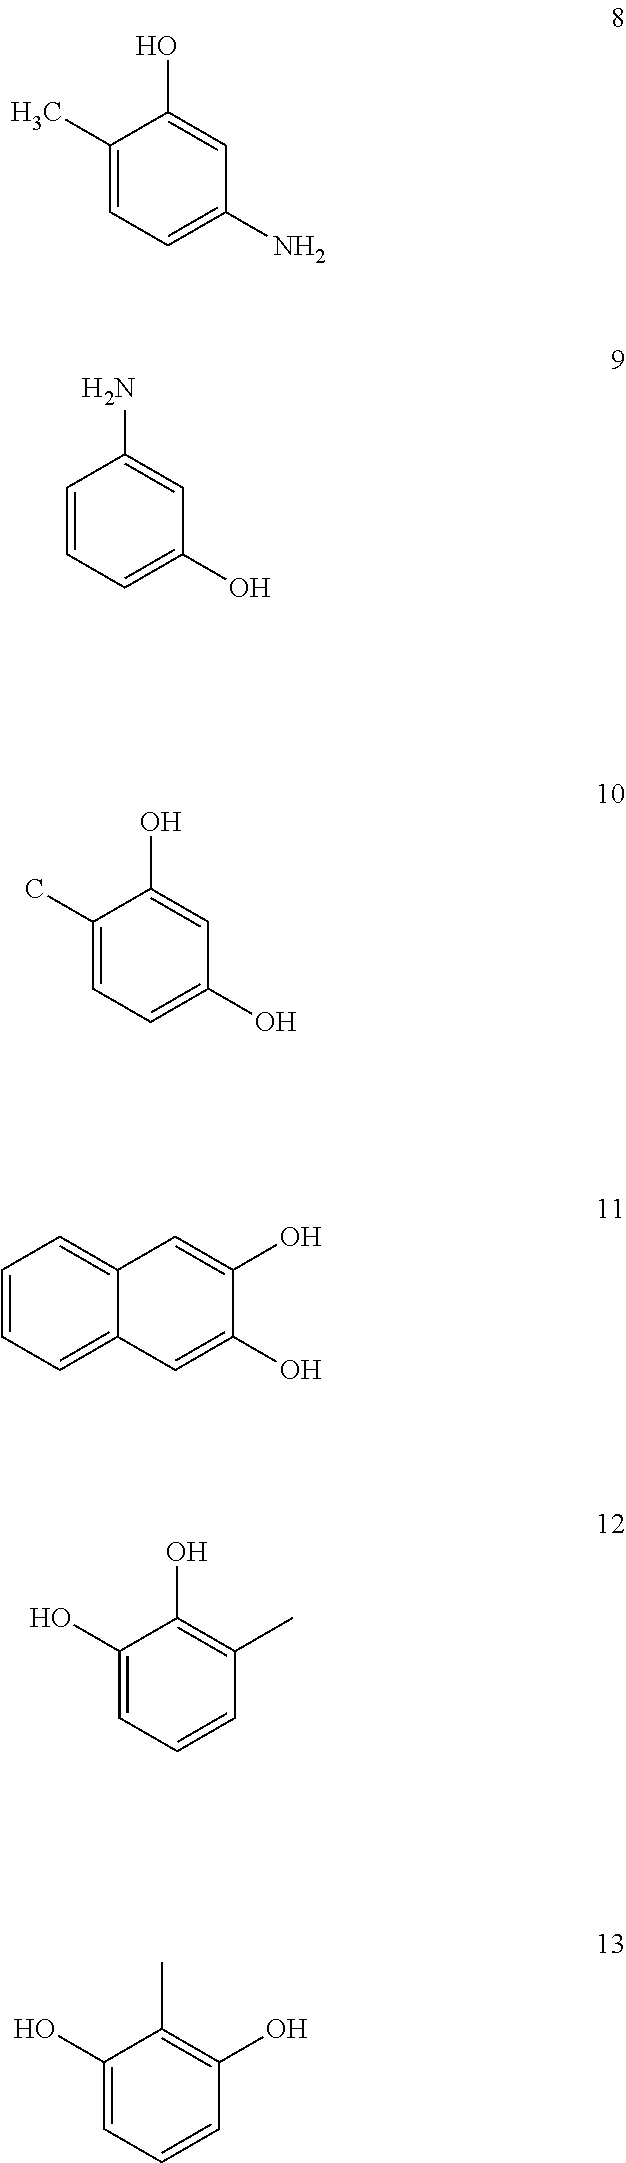 Catalysed Dye Systems